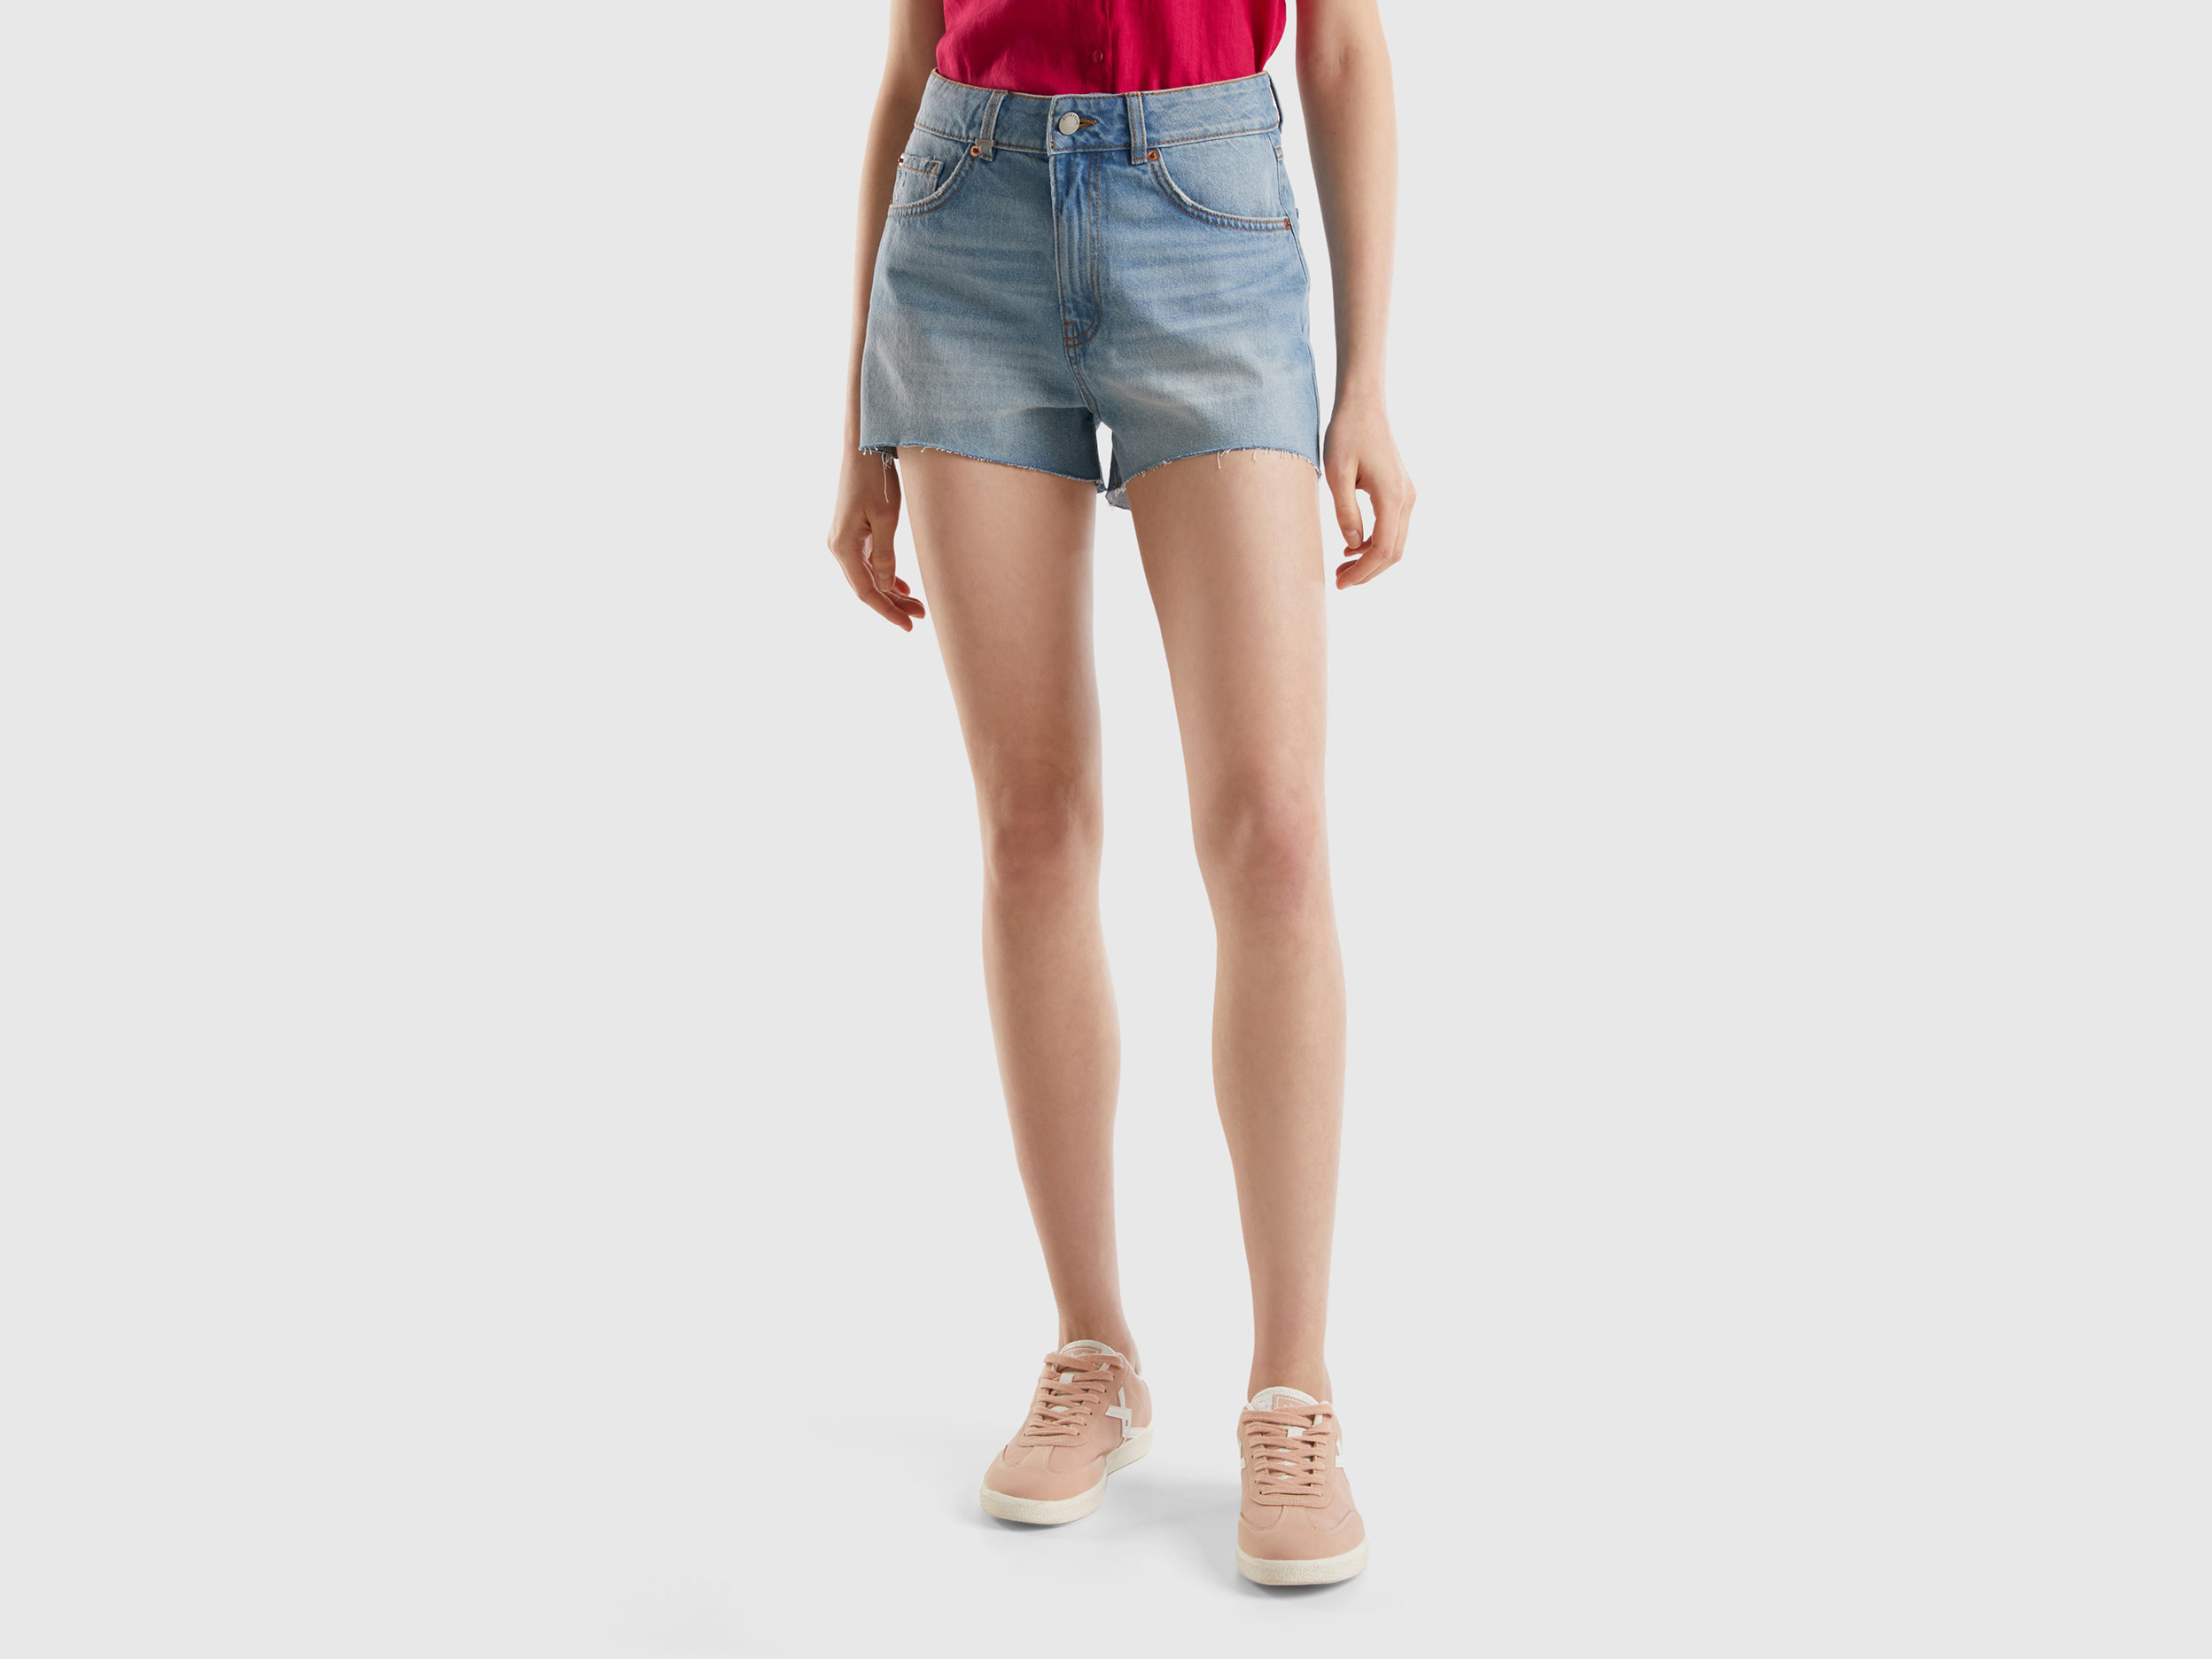 Image of Benetton, Frayed Shorts In Recycled Cotton Blend, size 32, Light Blue, Women